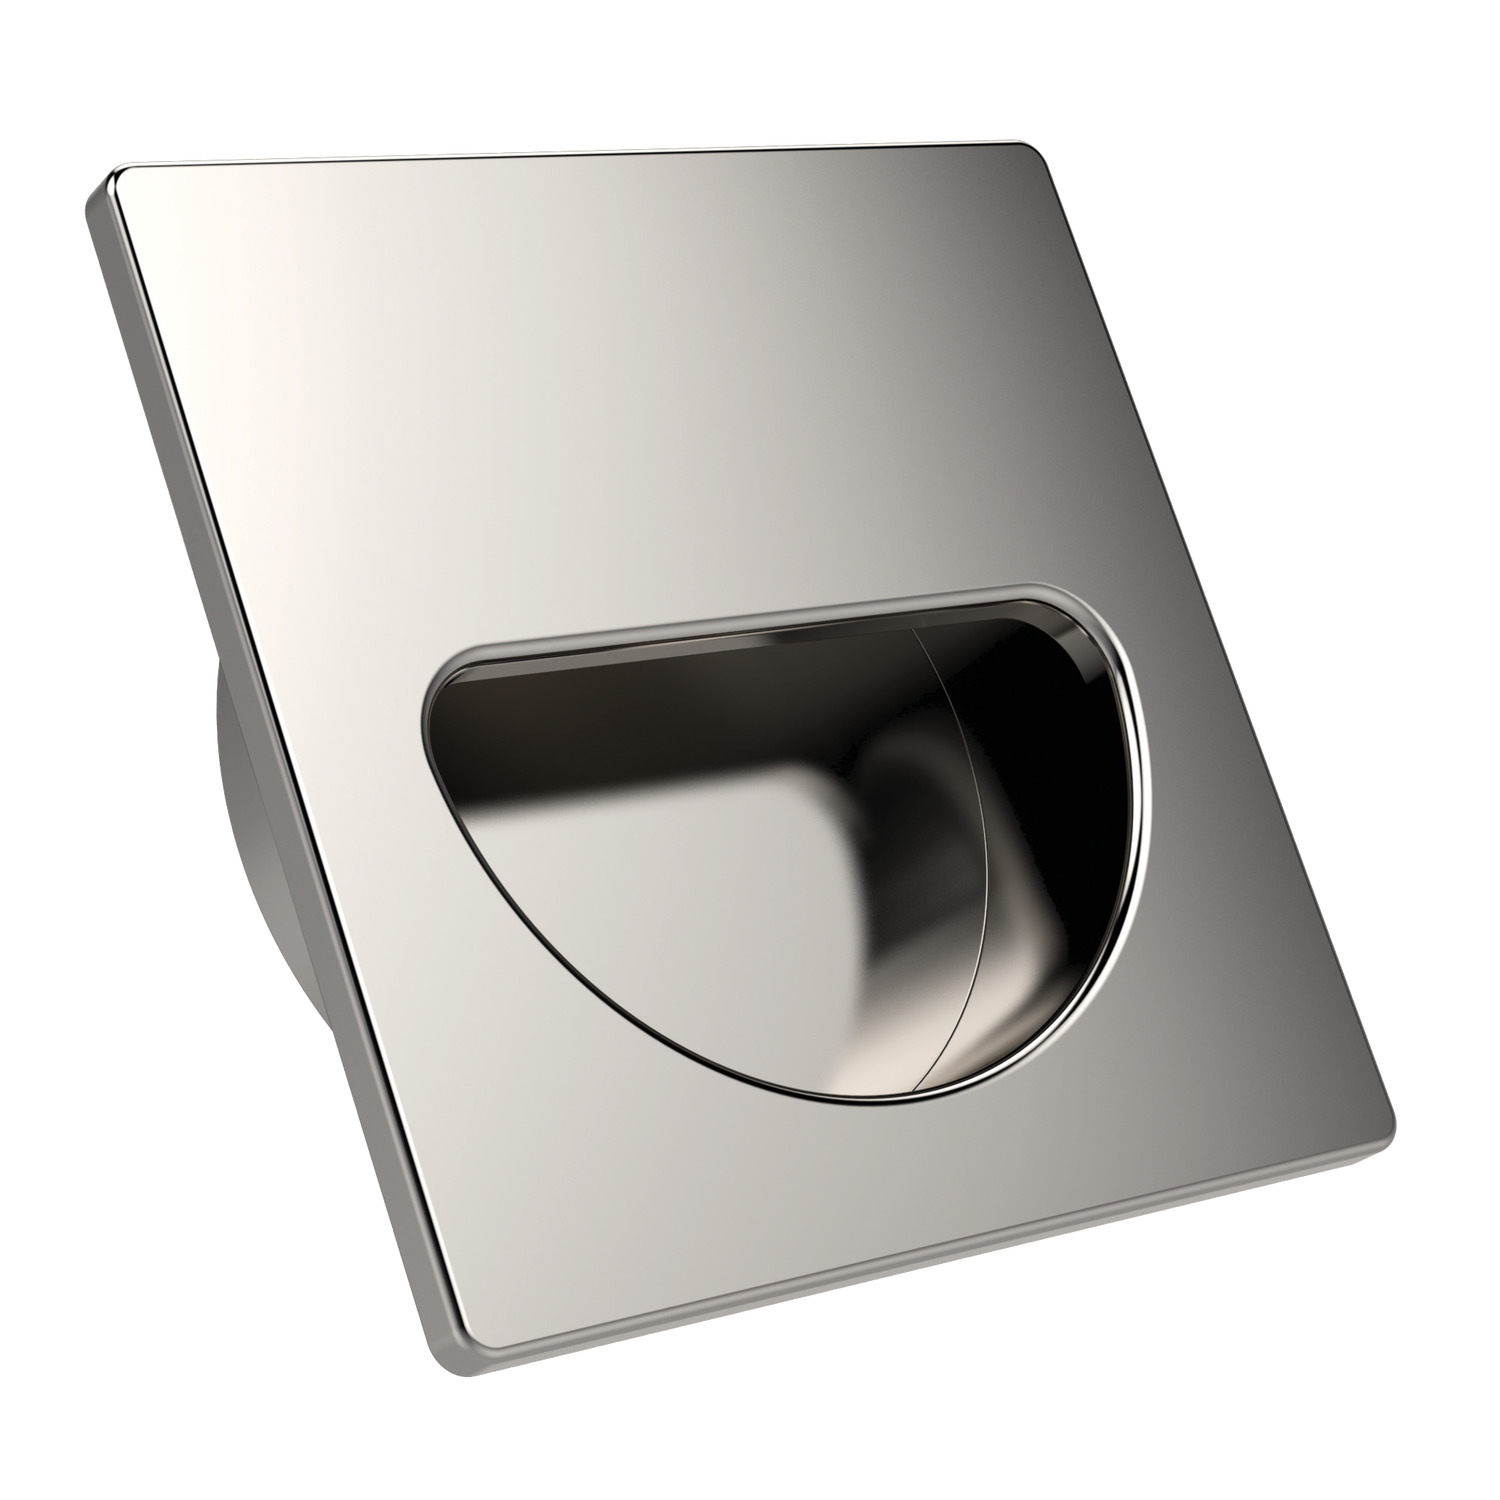 79510.W0035 Recessed Pull Handles, Stainless Steel Also known as U5380.AC0035